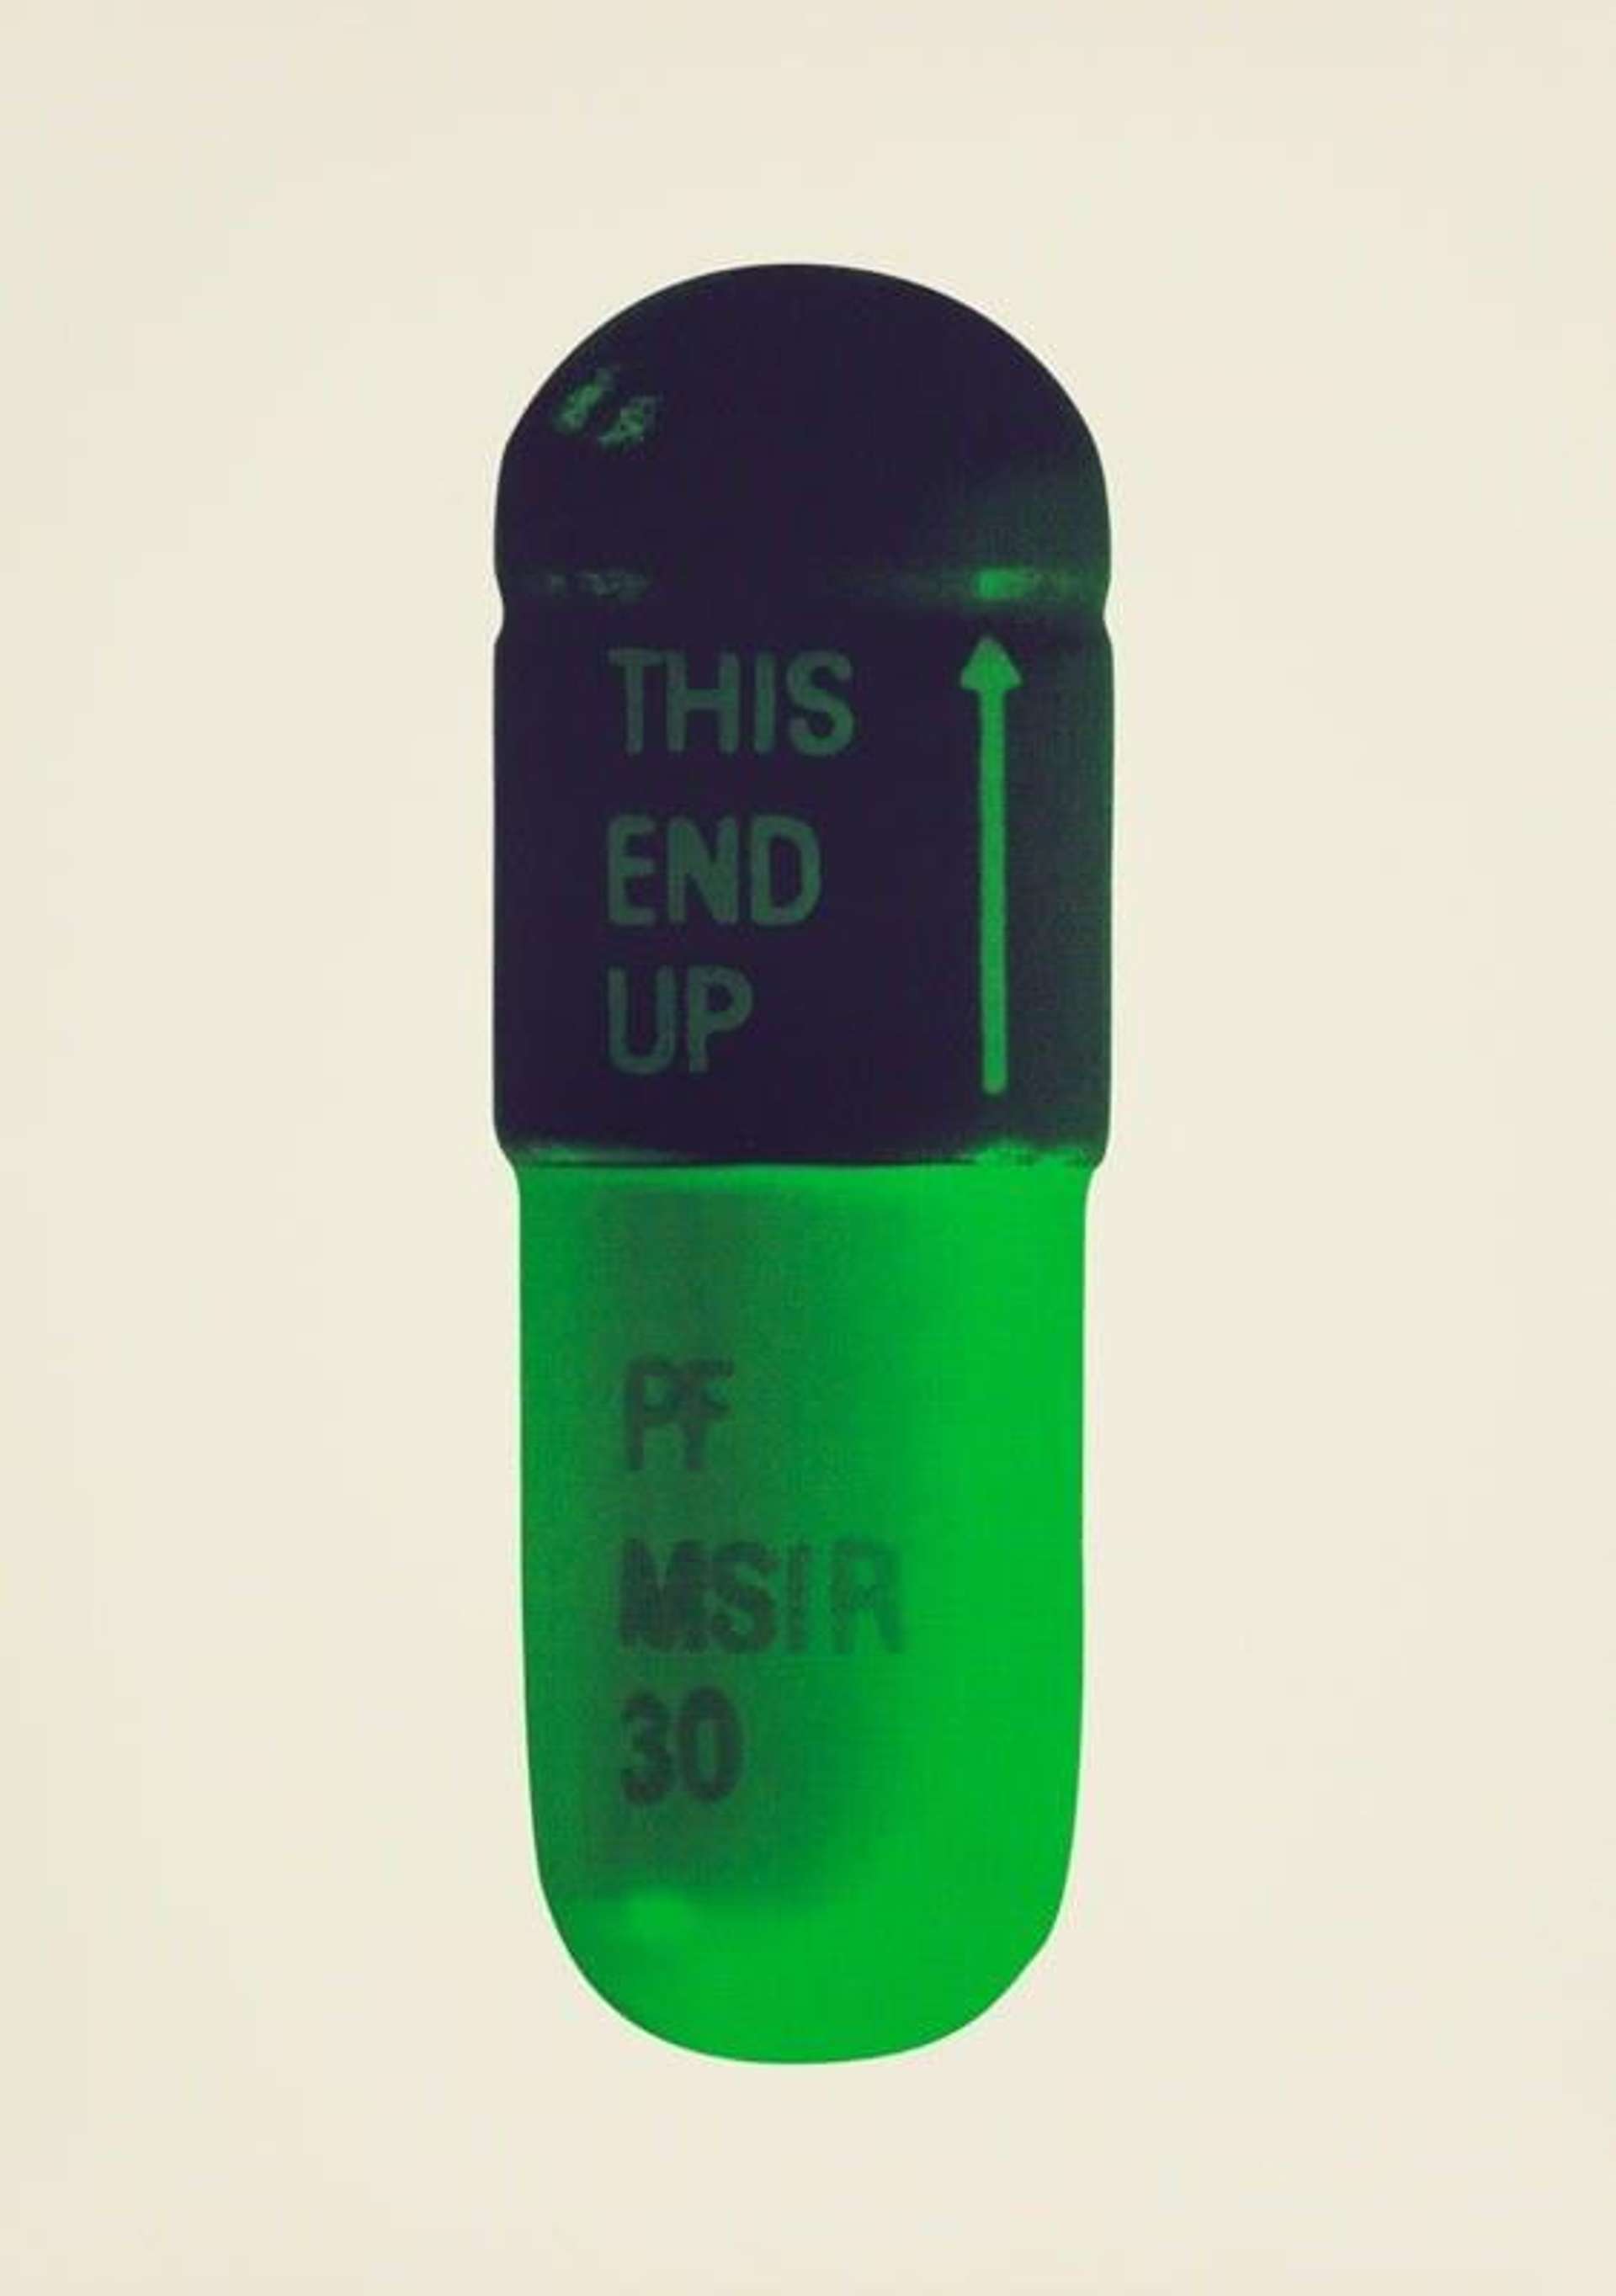 The Cure (Cream, Aubergine, Pea Green) by Damien Hirst